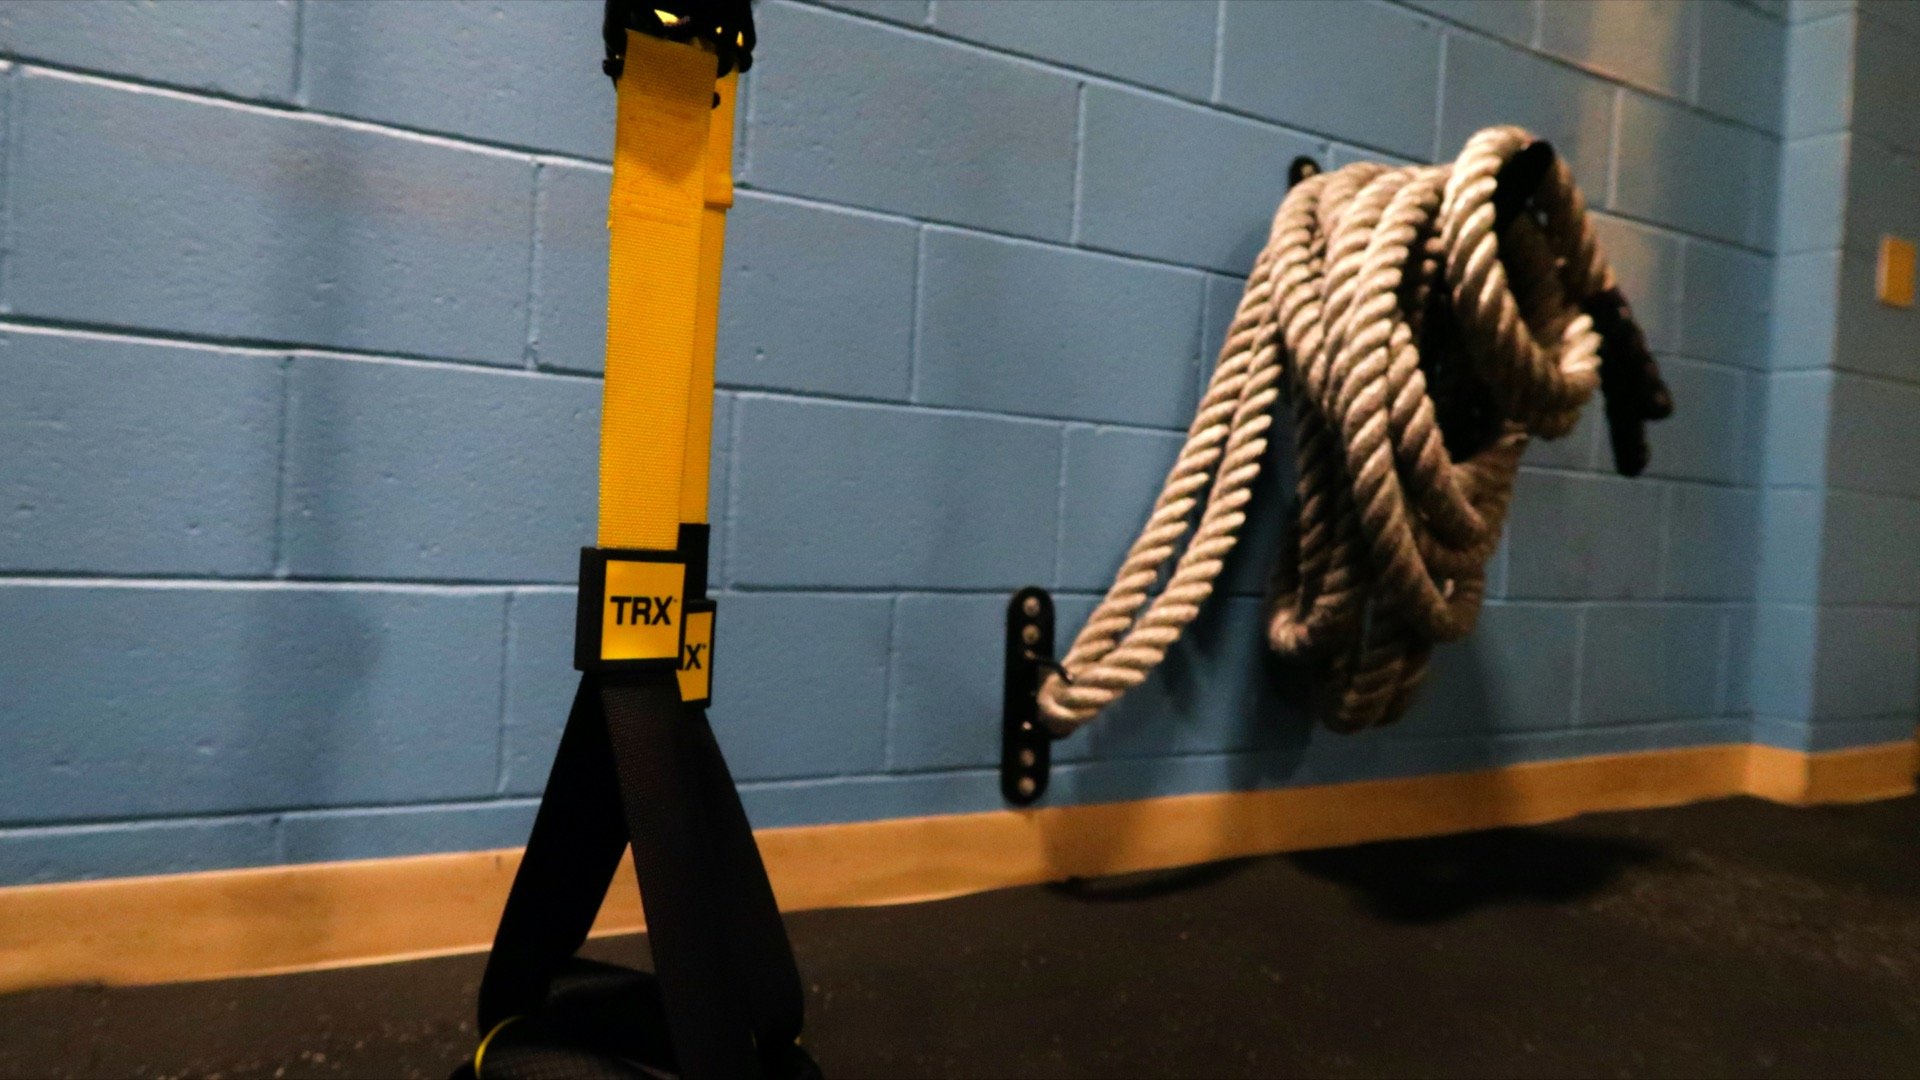 trx and battle ropes.jpg